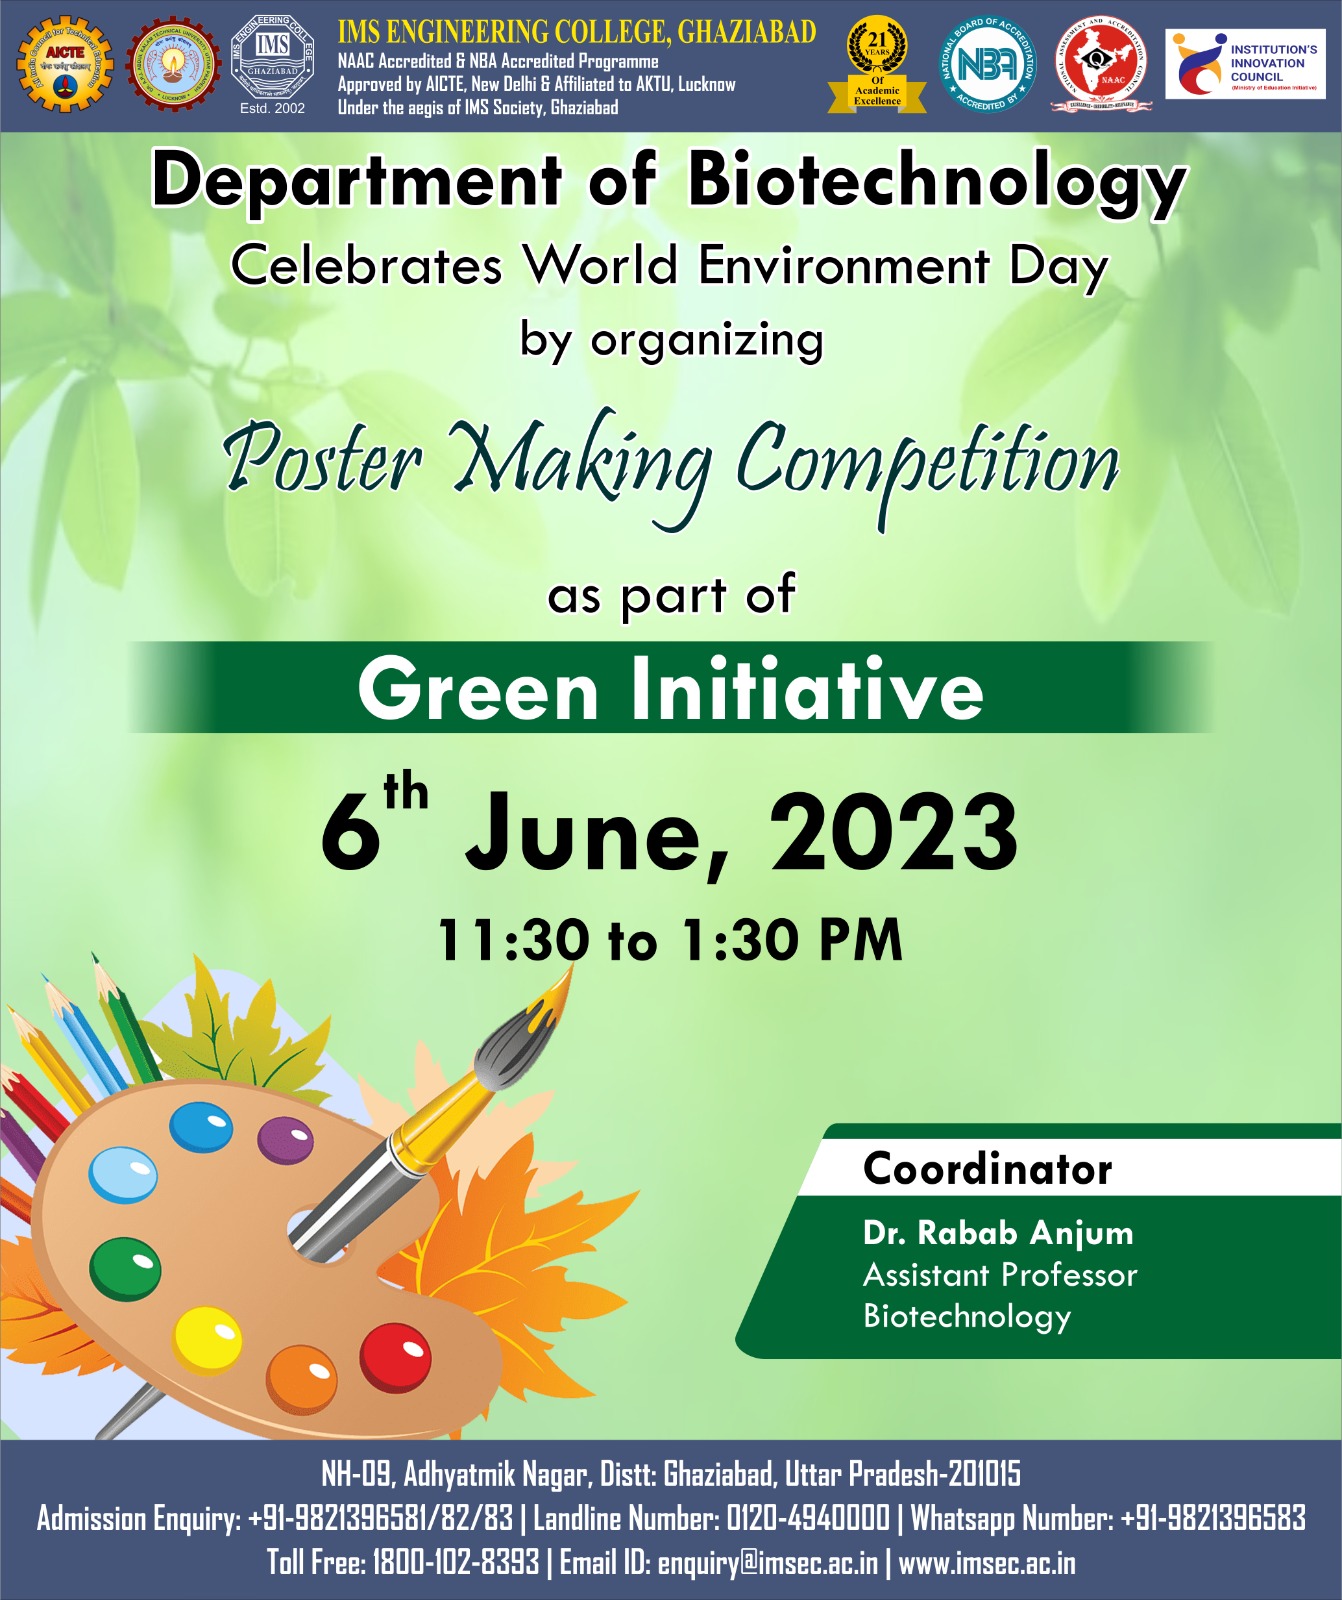 Competition on theme-Environment pollutions and ways to attain environmental sustainability